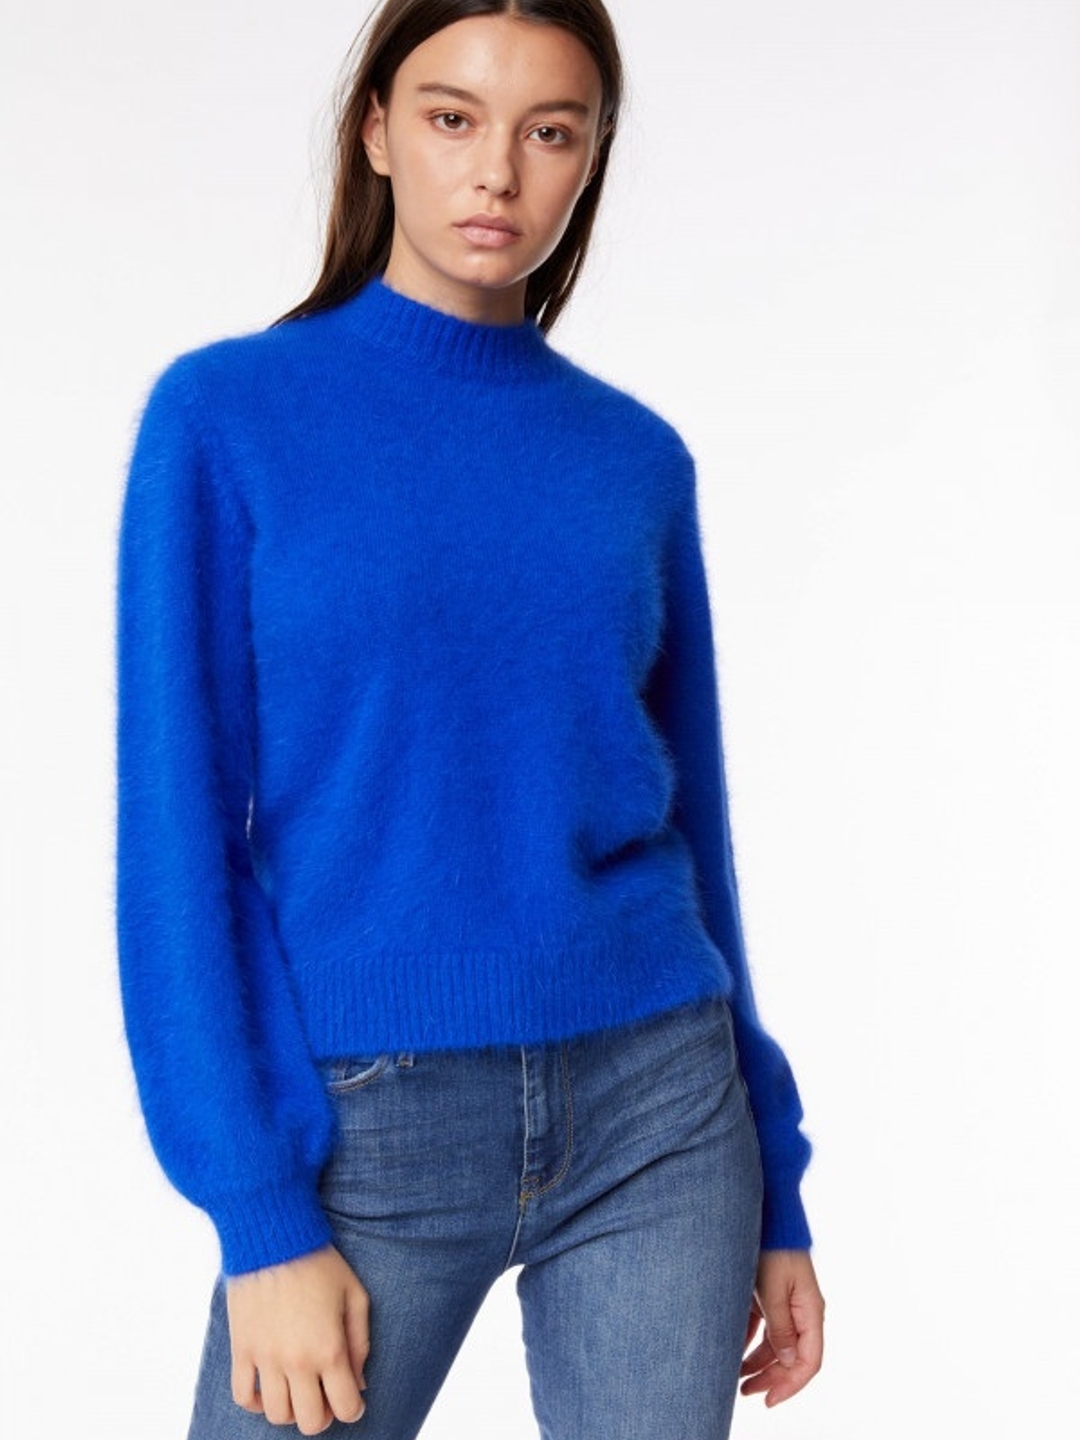 High-Neck Pullover with Cuffed Sleeves